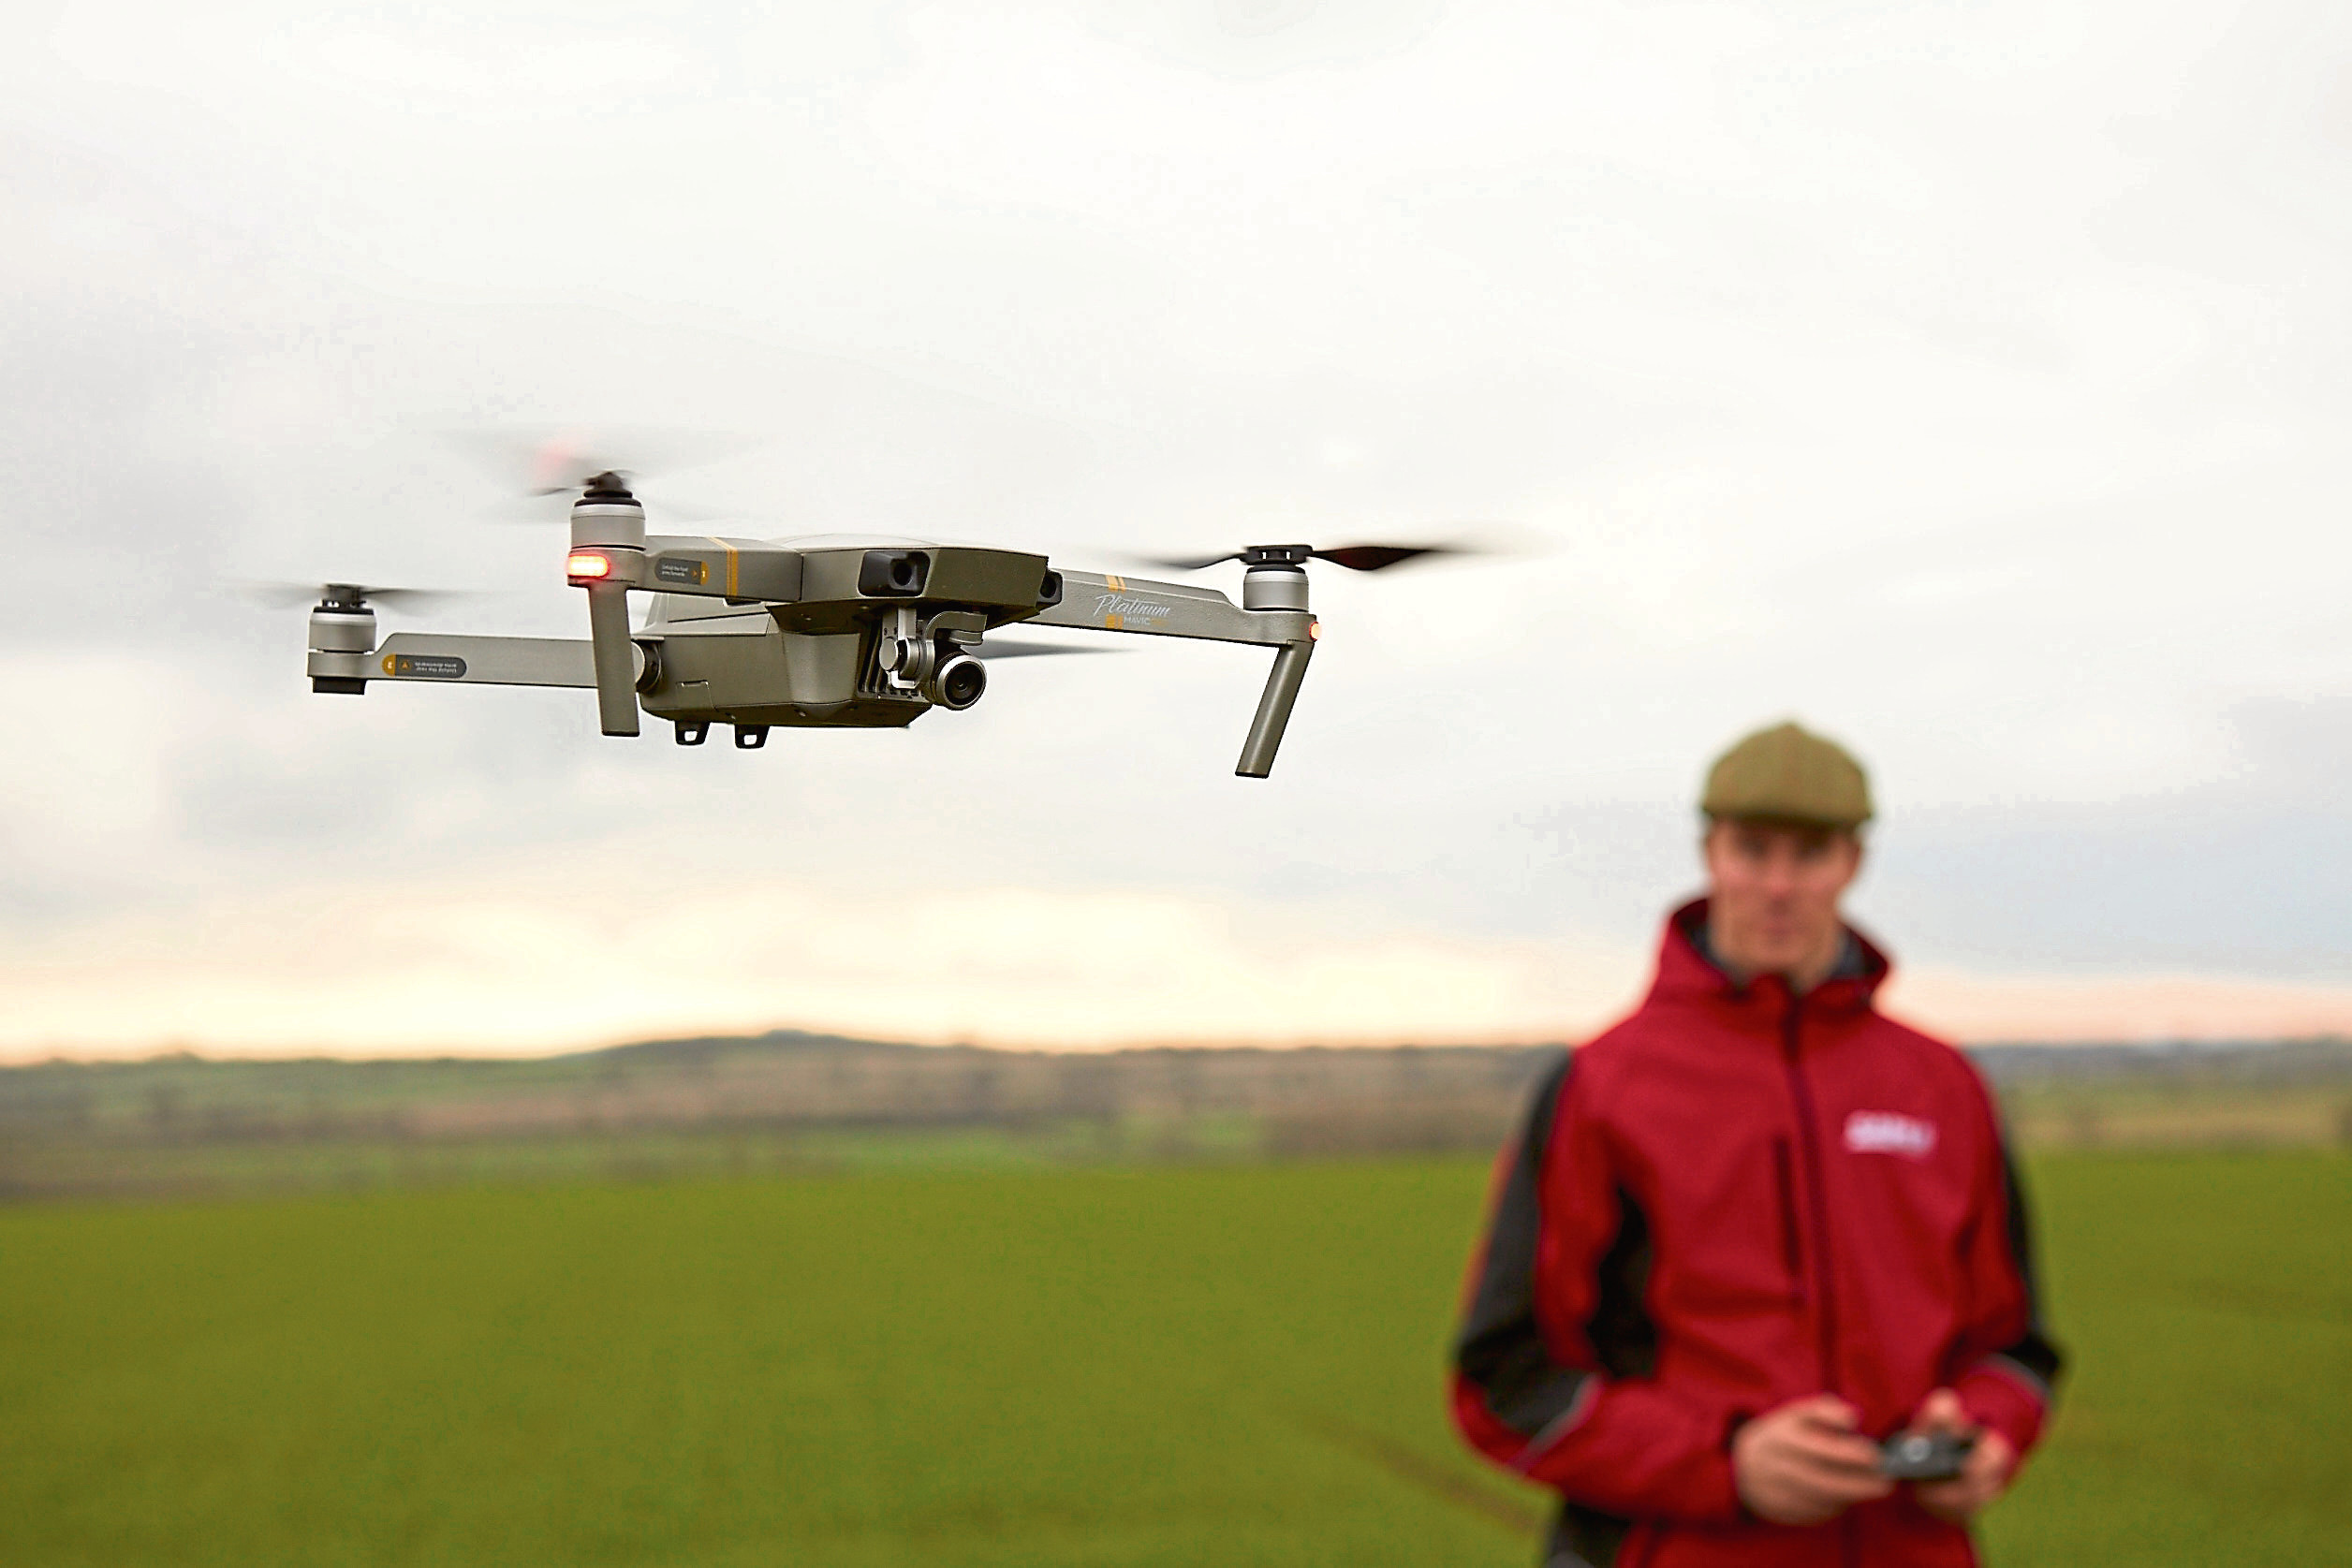 NFU Mutual says farmers need to understand the rules surrounding drone usage.